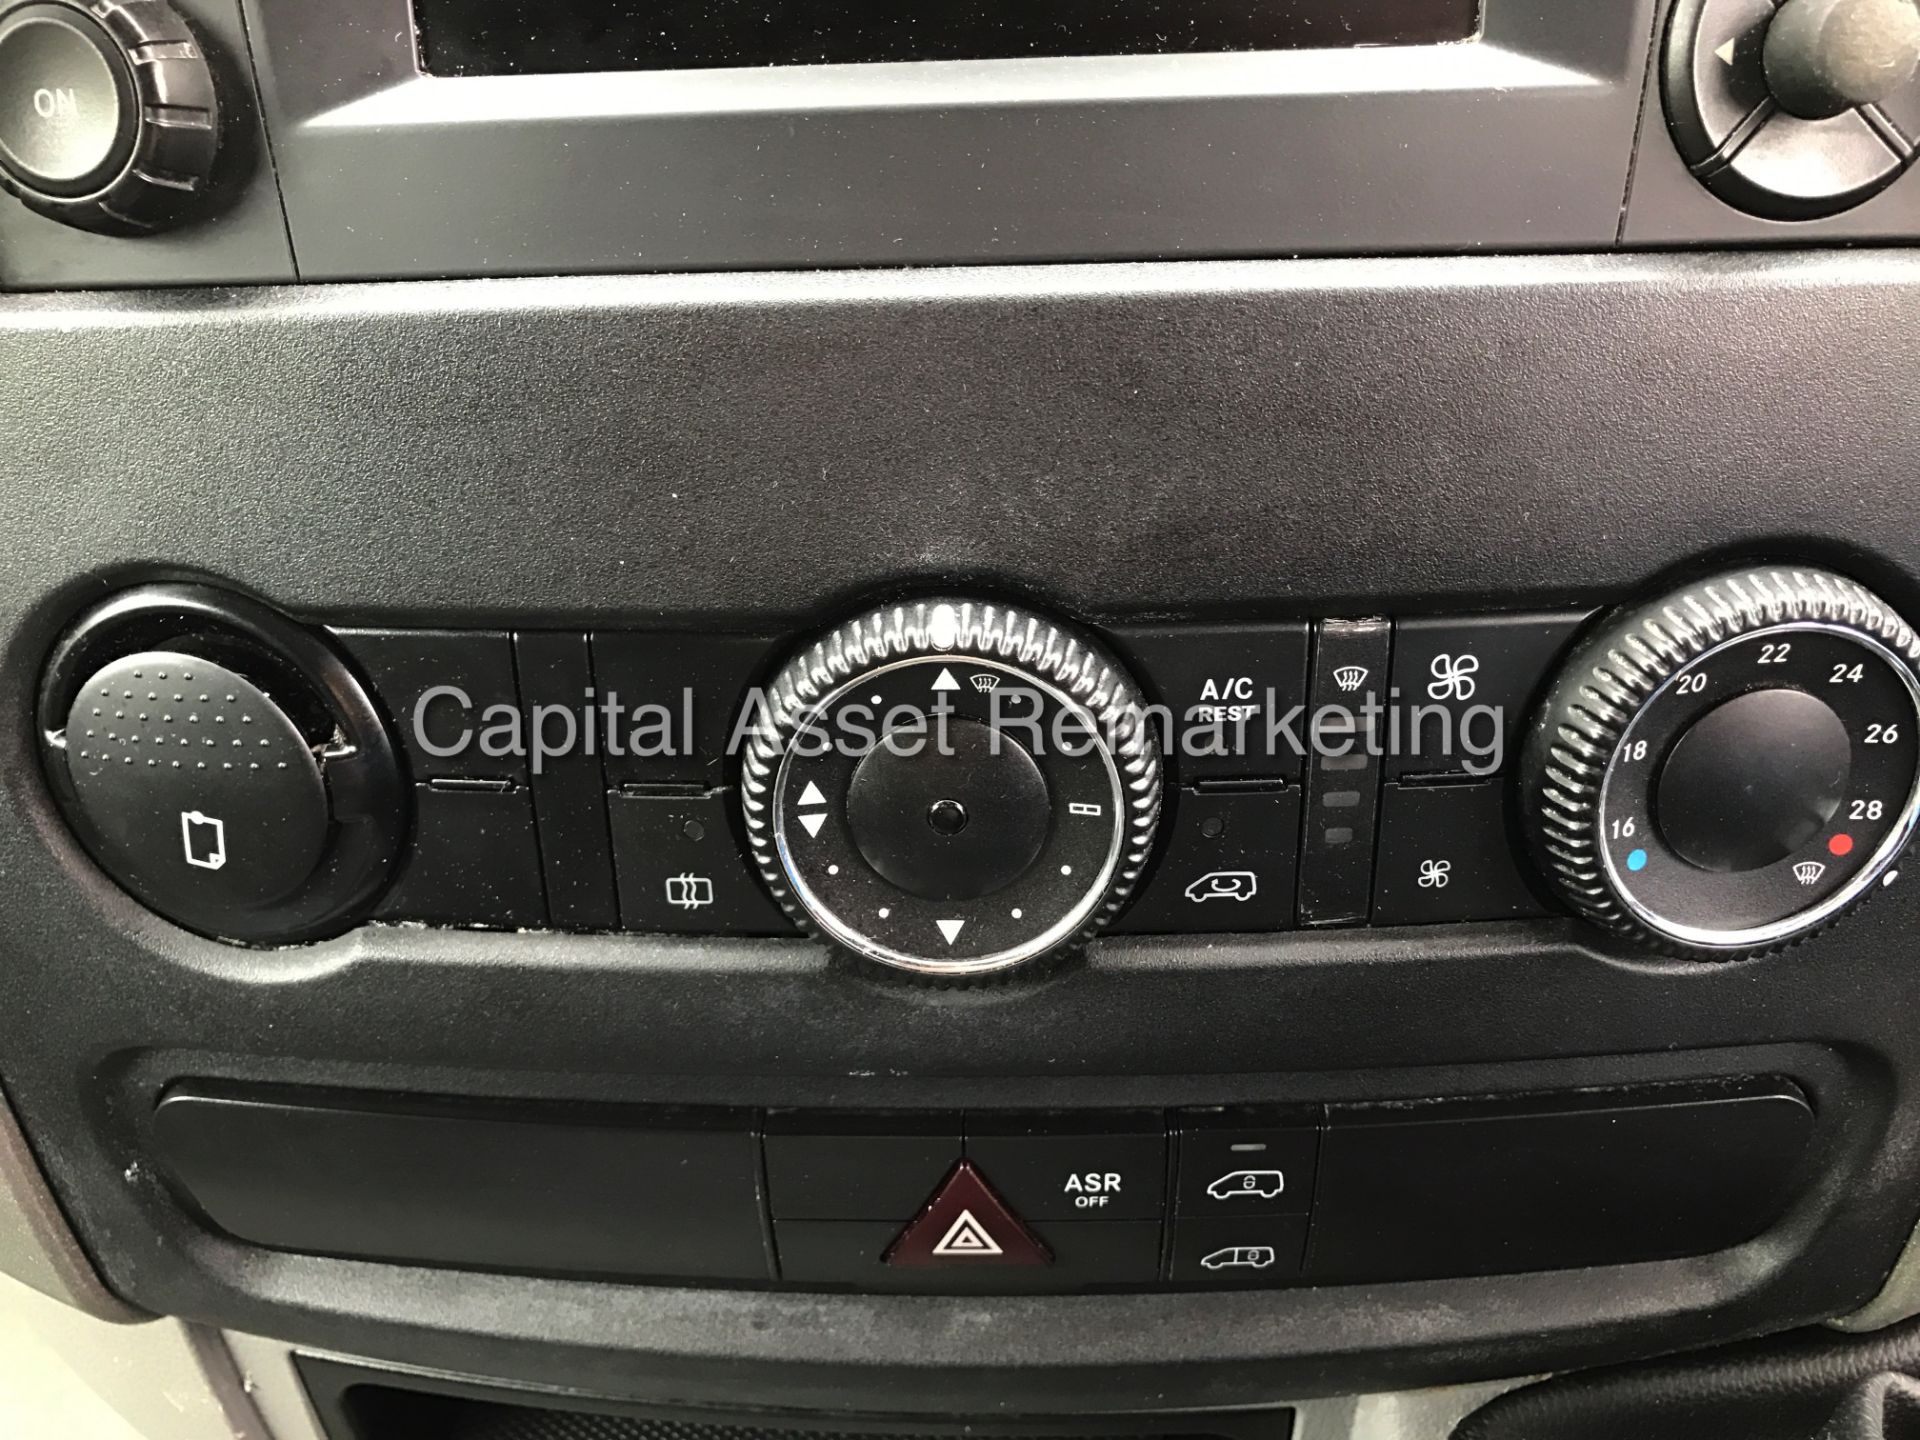 VOLKSWAGEN CRAFTER CR30 SWB 2.0TDI (109) - NEW SHAPE - 14 REG - MASSIVE SPEC - AIR CON!! - 1 OWNER! - Image 11 of 13